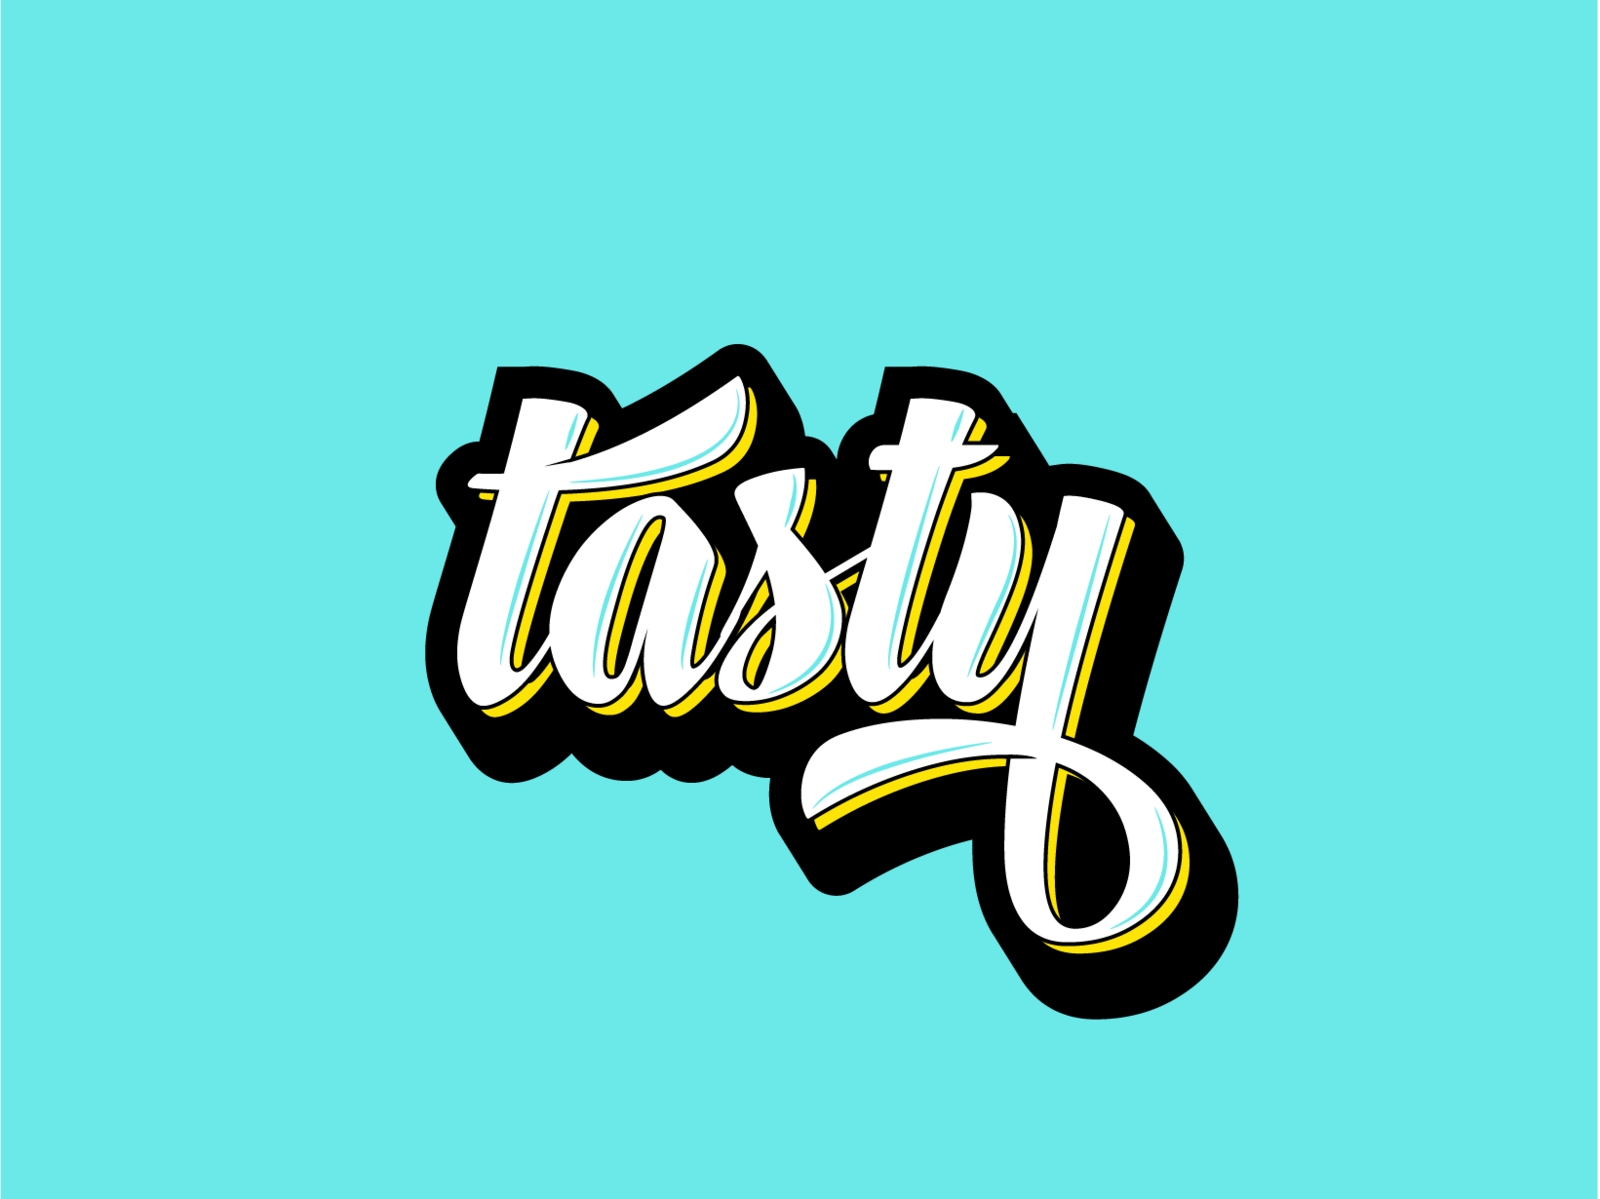 Tasty Logo by Jacques Nshimiyimana on Dribbble